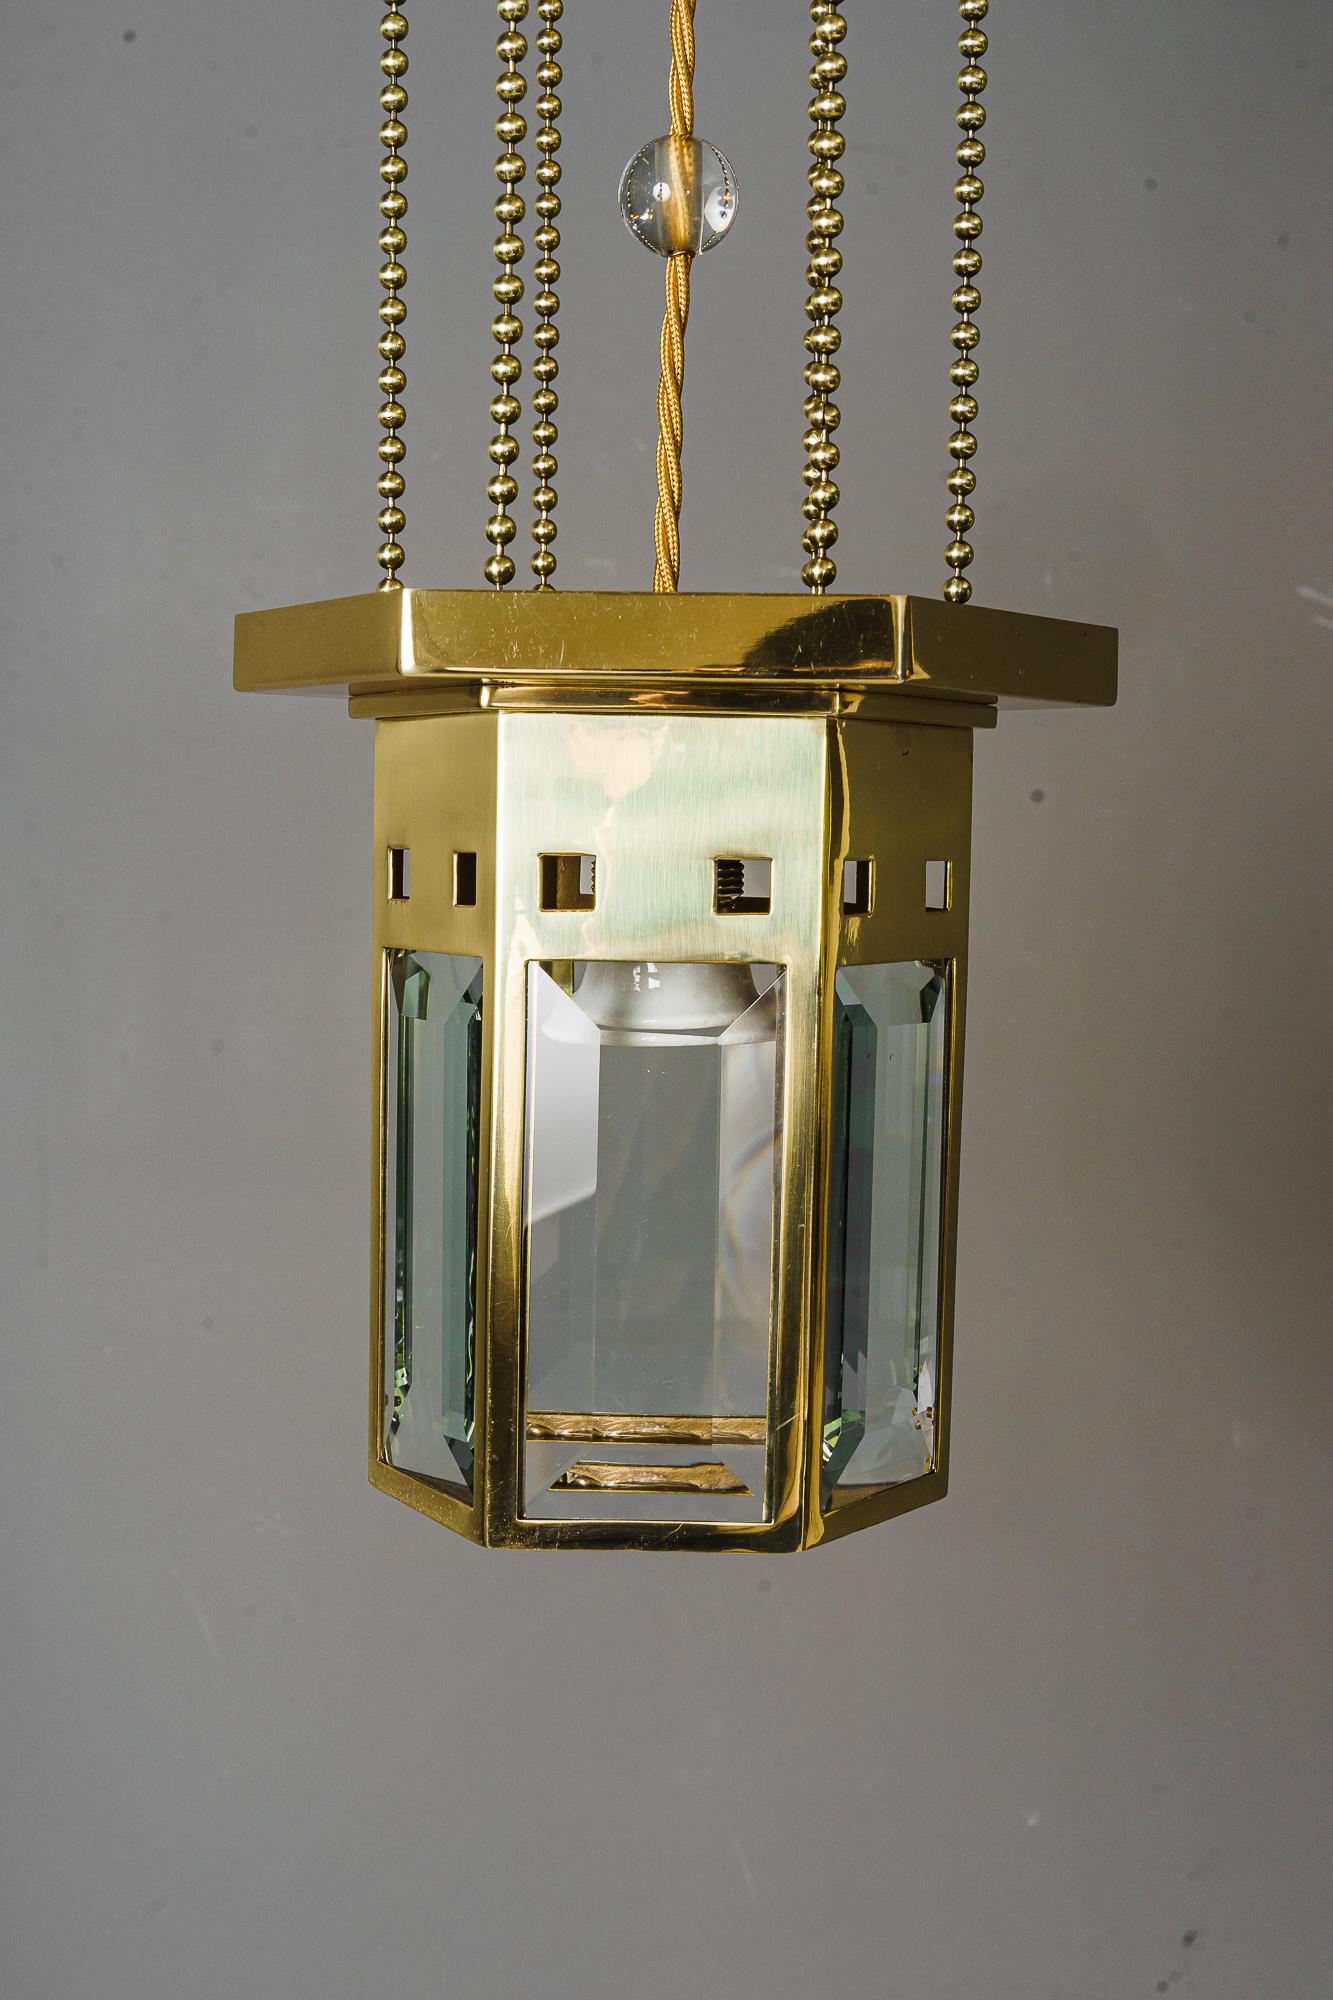 Art Deco pendant, Vienna, around 1920s.
Original glass inside (facet cut)
Polished and stove enameled.